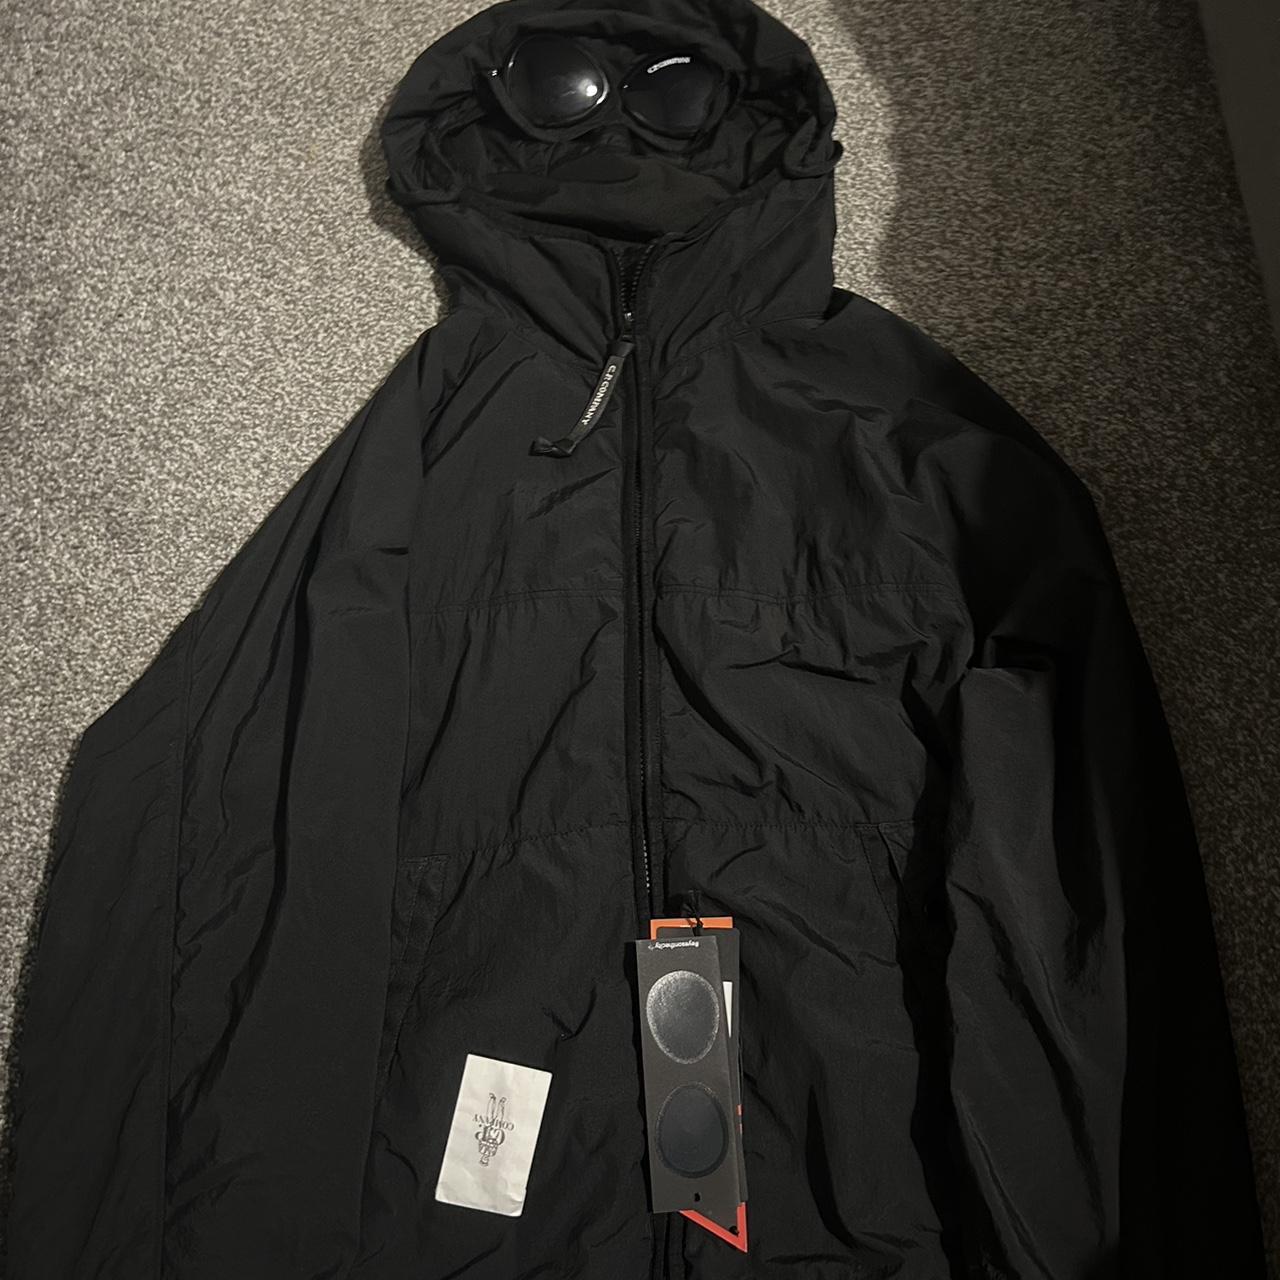 Cp Company G.D.P Jacket Comes with tags Perfect... - Depop